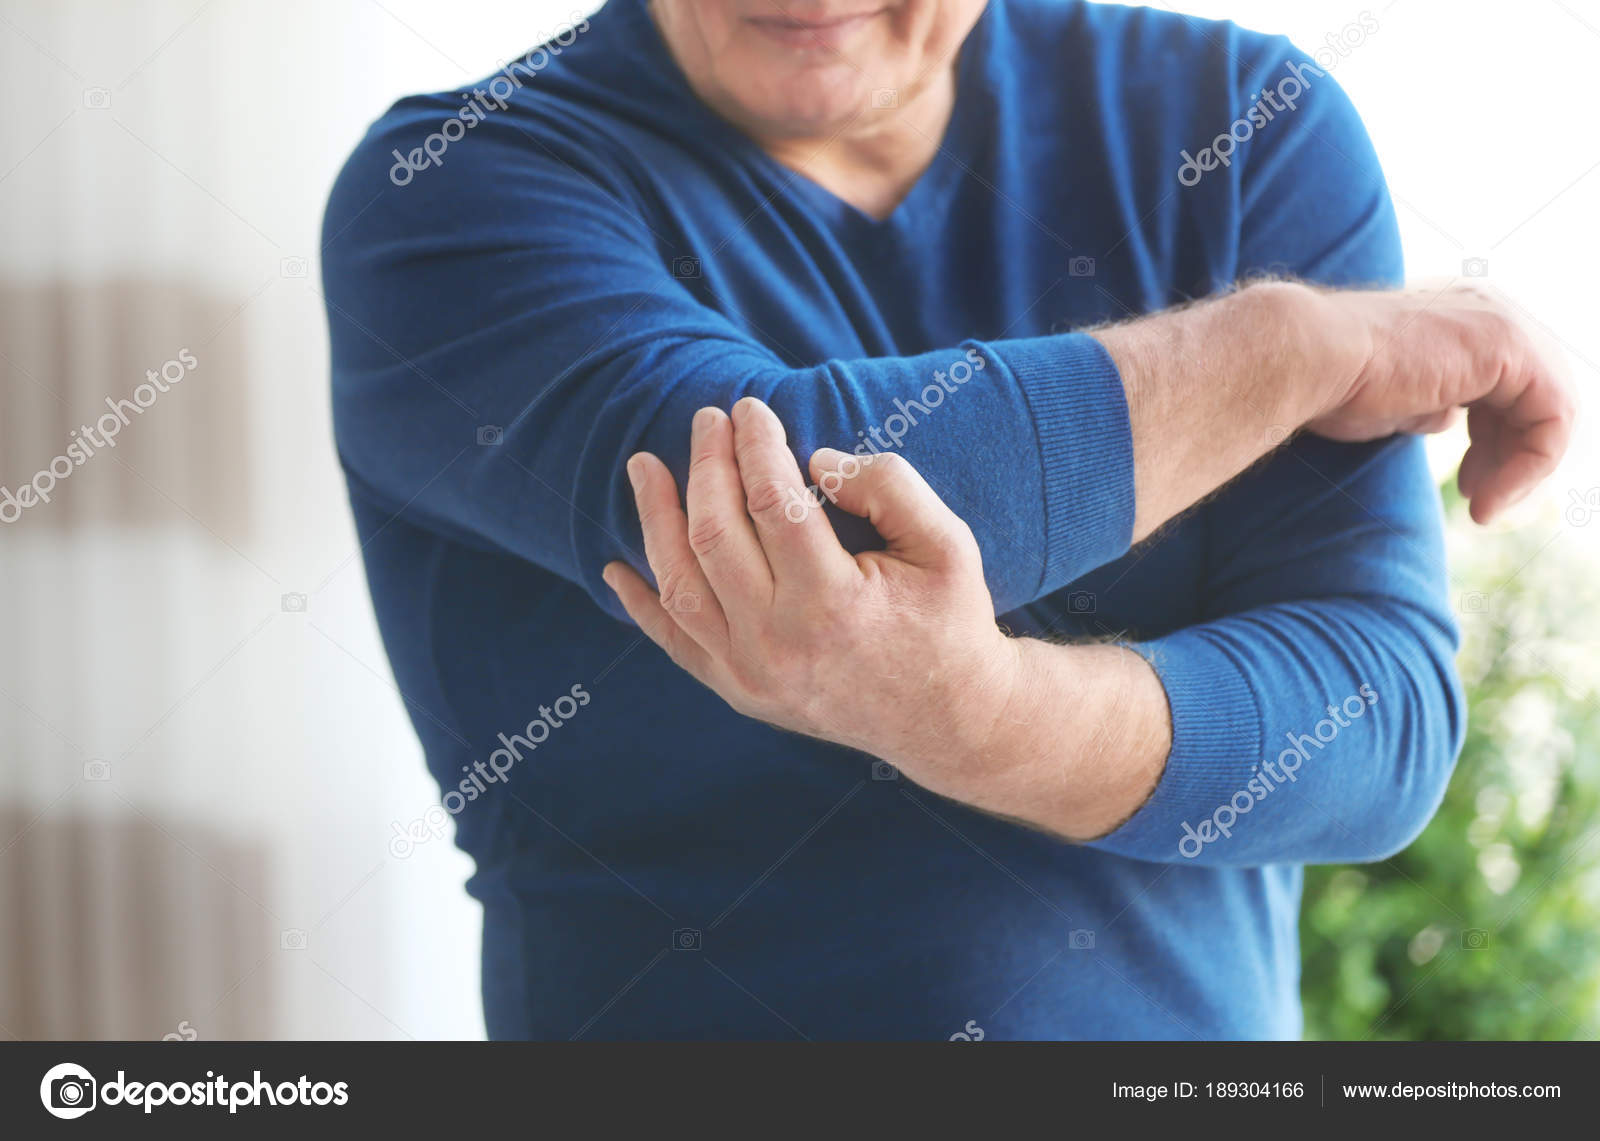 Elbow injury images, stock photos vectors